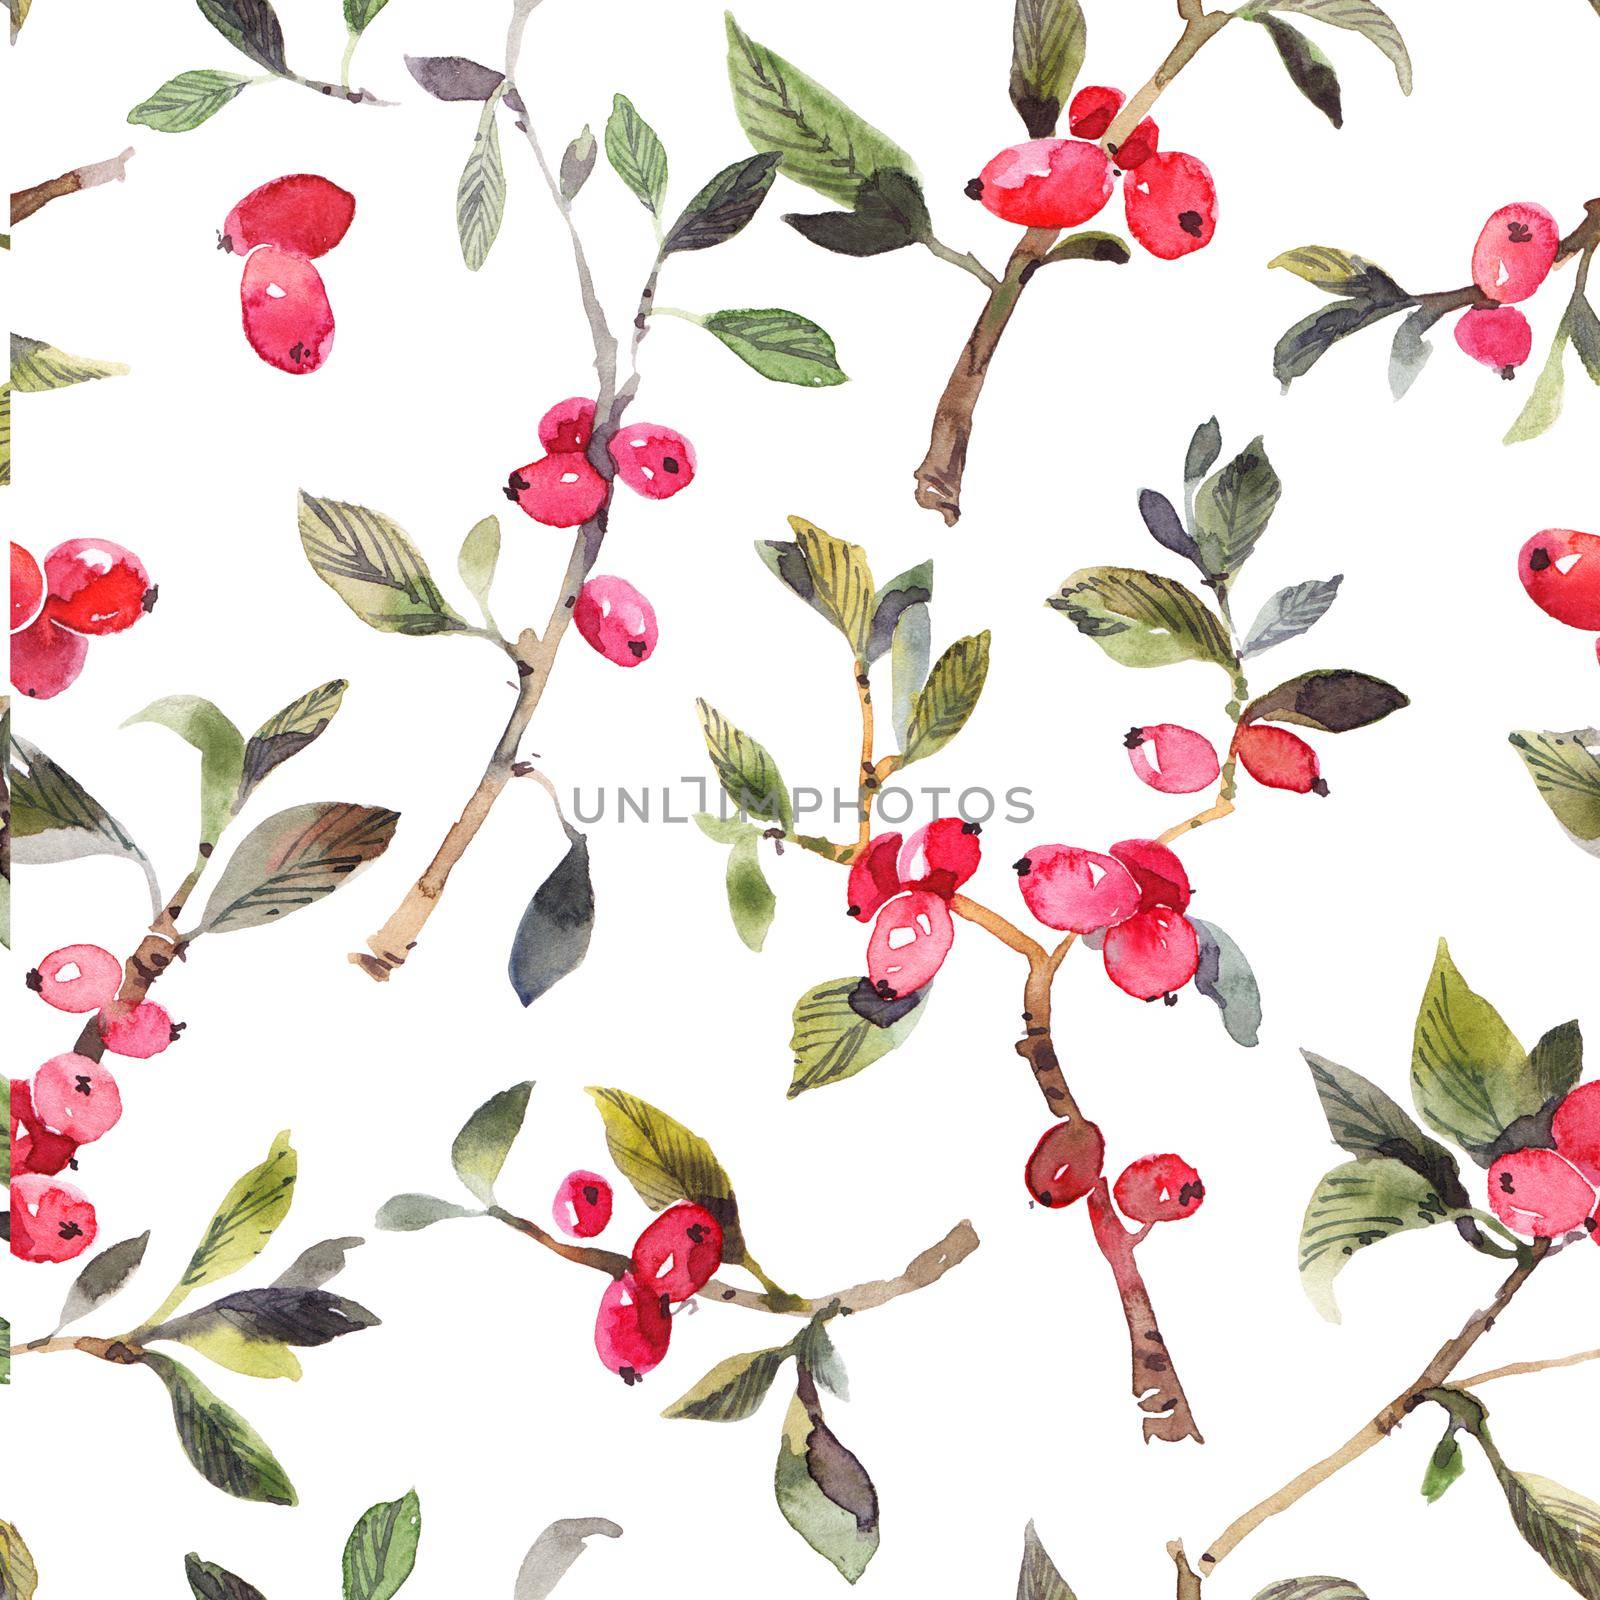 Watercolor botanical illustration of twig with red berries on white background. Seamless pattern.